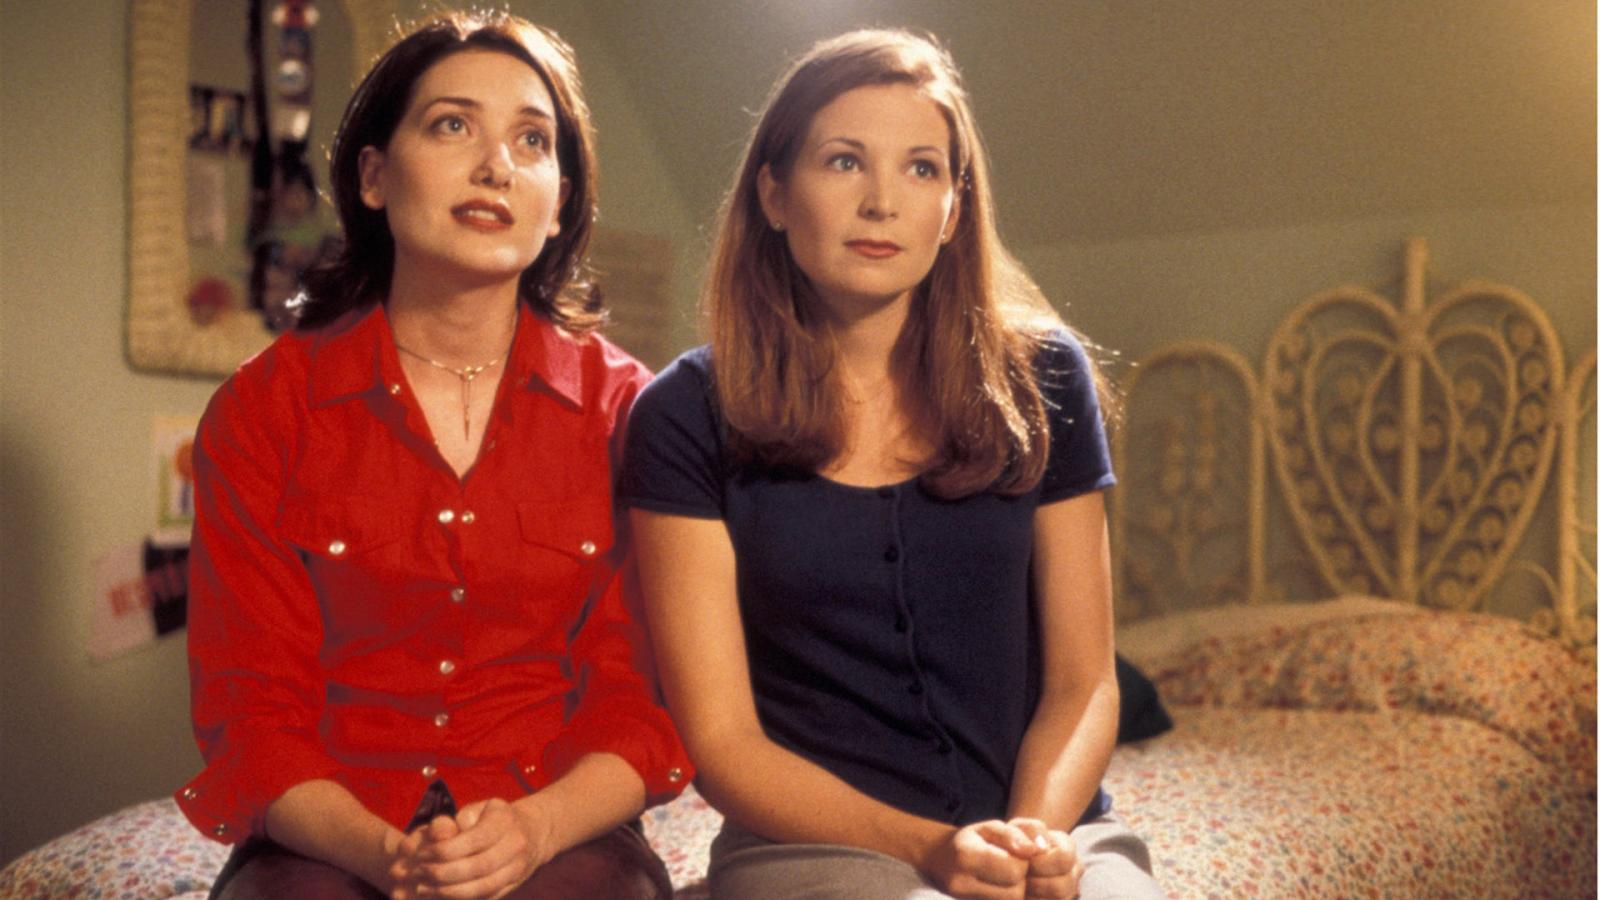 15 Unforgettable Romantic Comedies of the 2000s You Might Have Missed - image 2